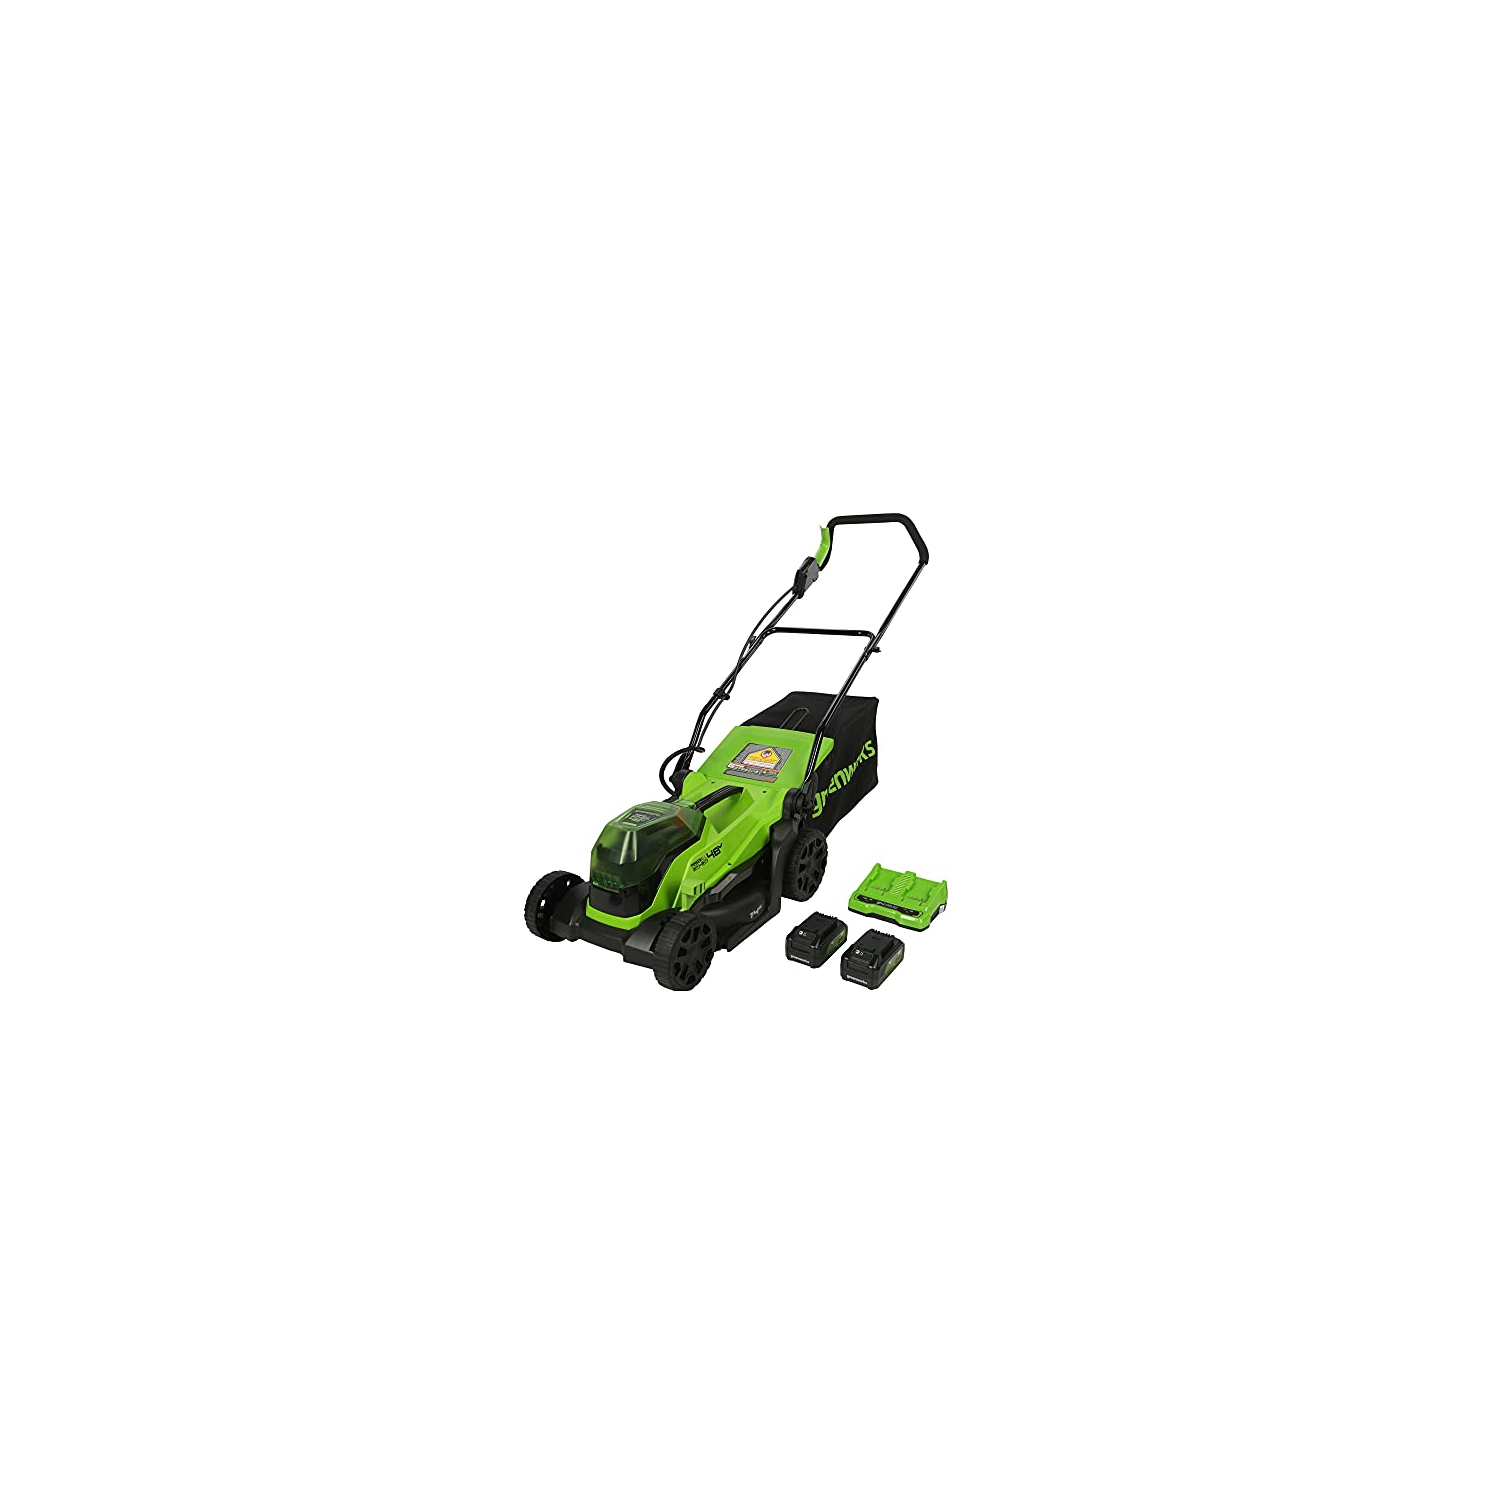 Greenworks 48V 14" Brushless Cordless Lawn Mower, (2) 4.0Ah USB Batteries (USB Hub) and Dual Port Rapid Charger Included (2 x 24V)